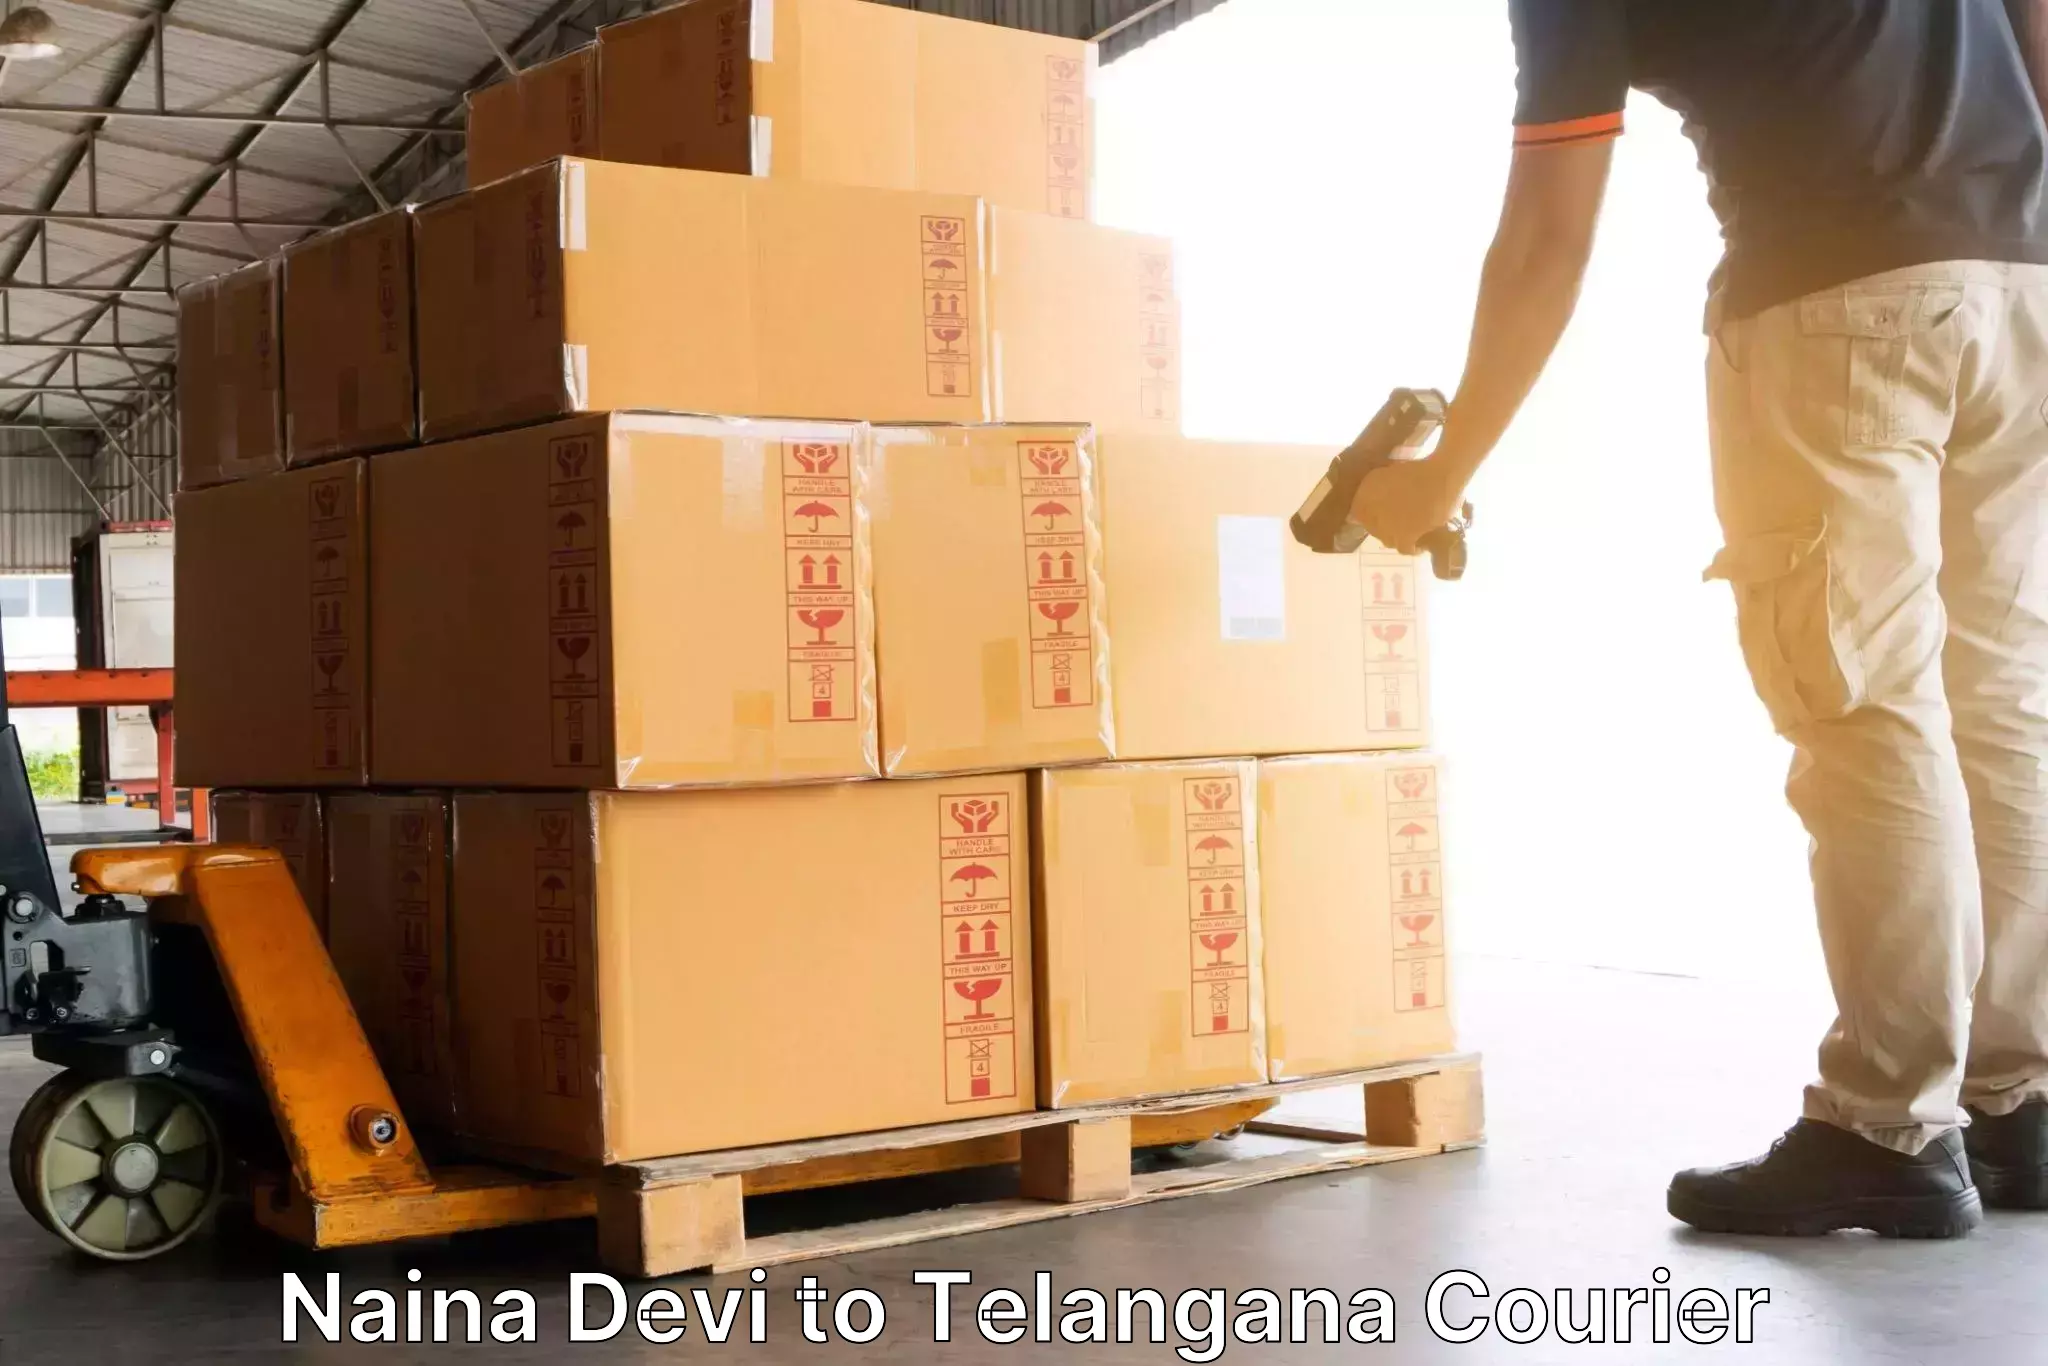 Specialized shipment handling Naina Devi to International Institute of Information Technology Hyderabad